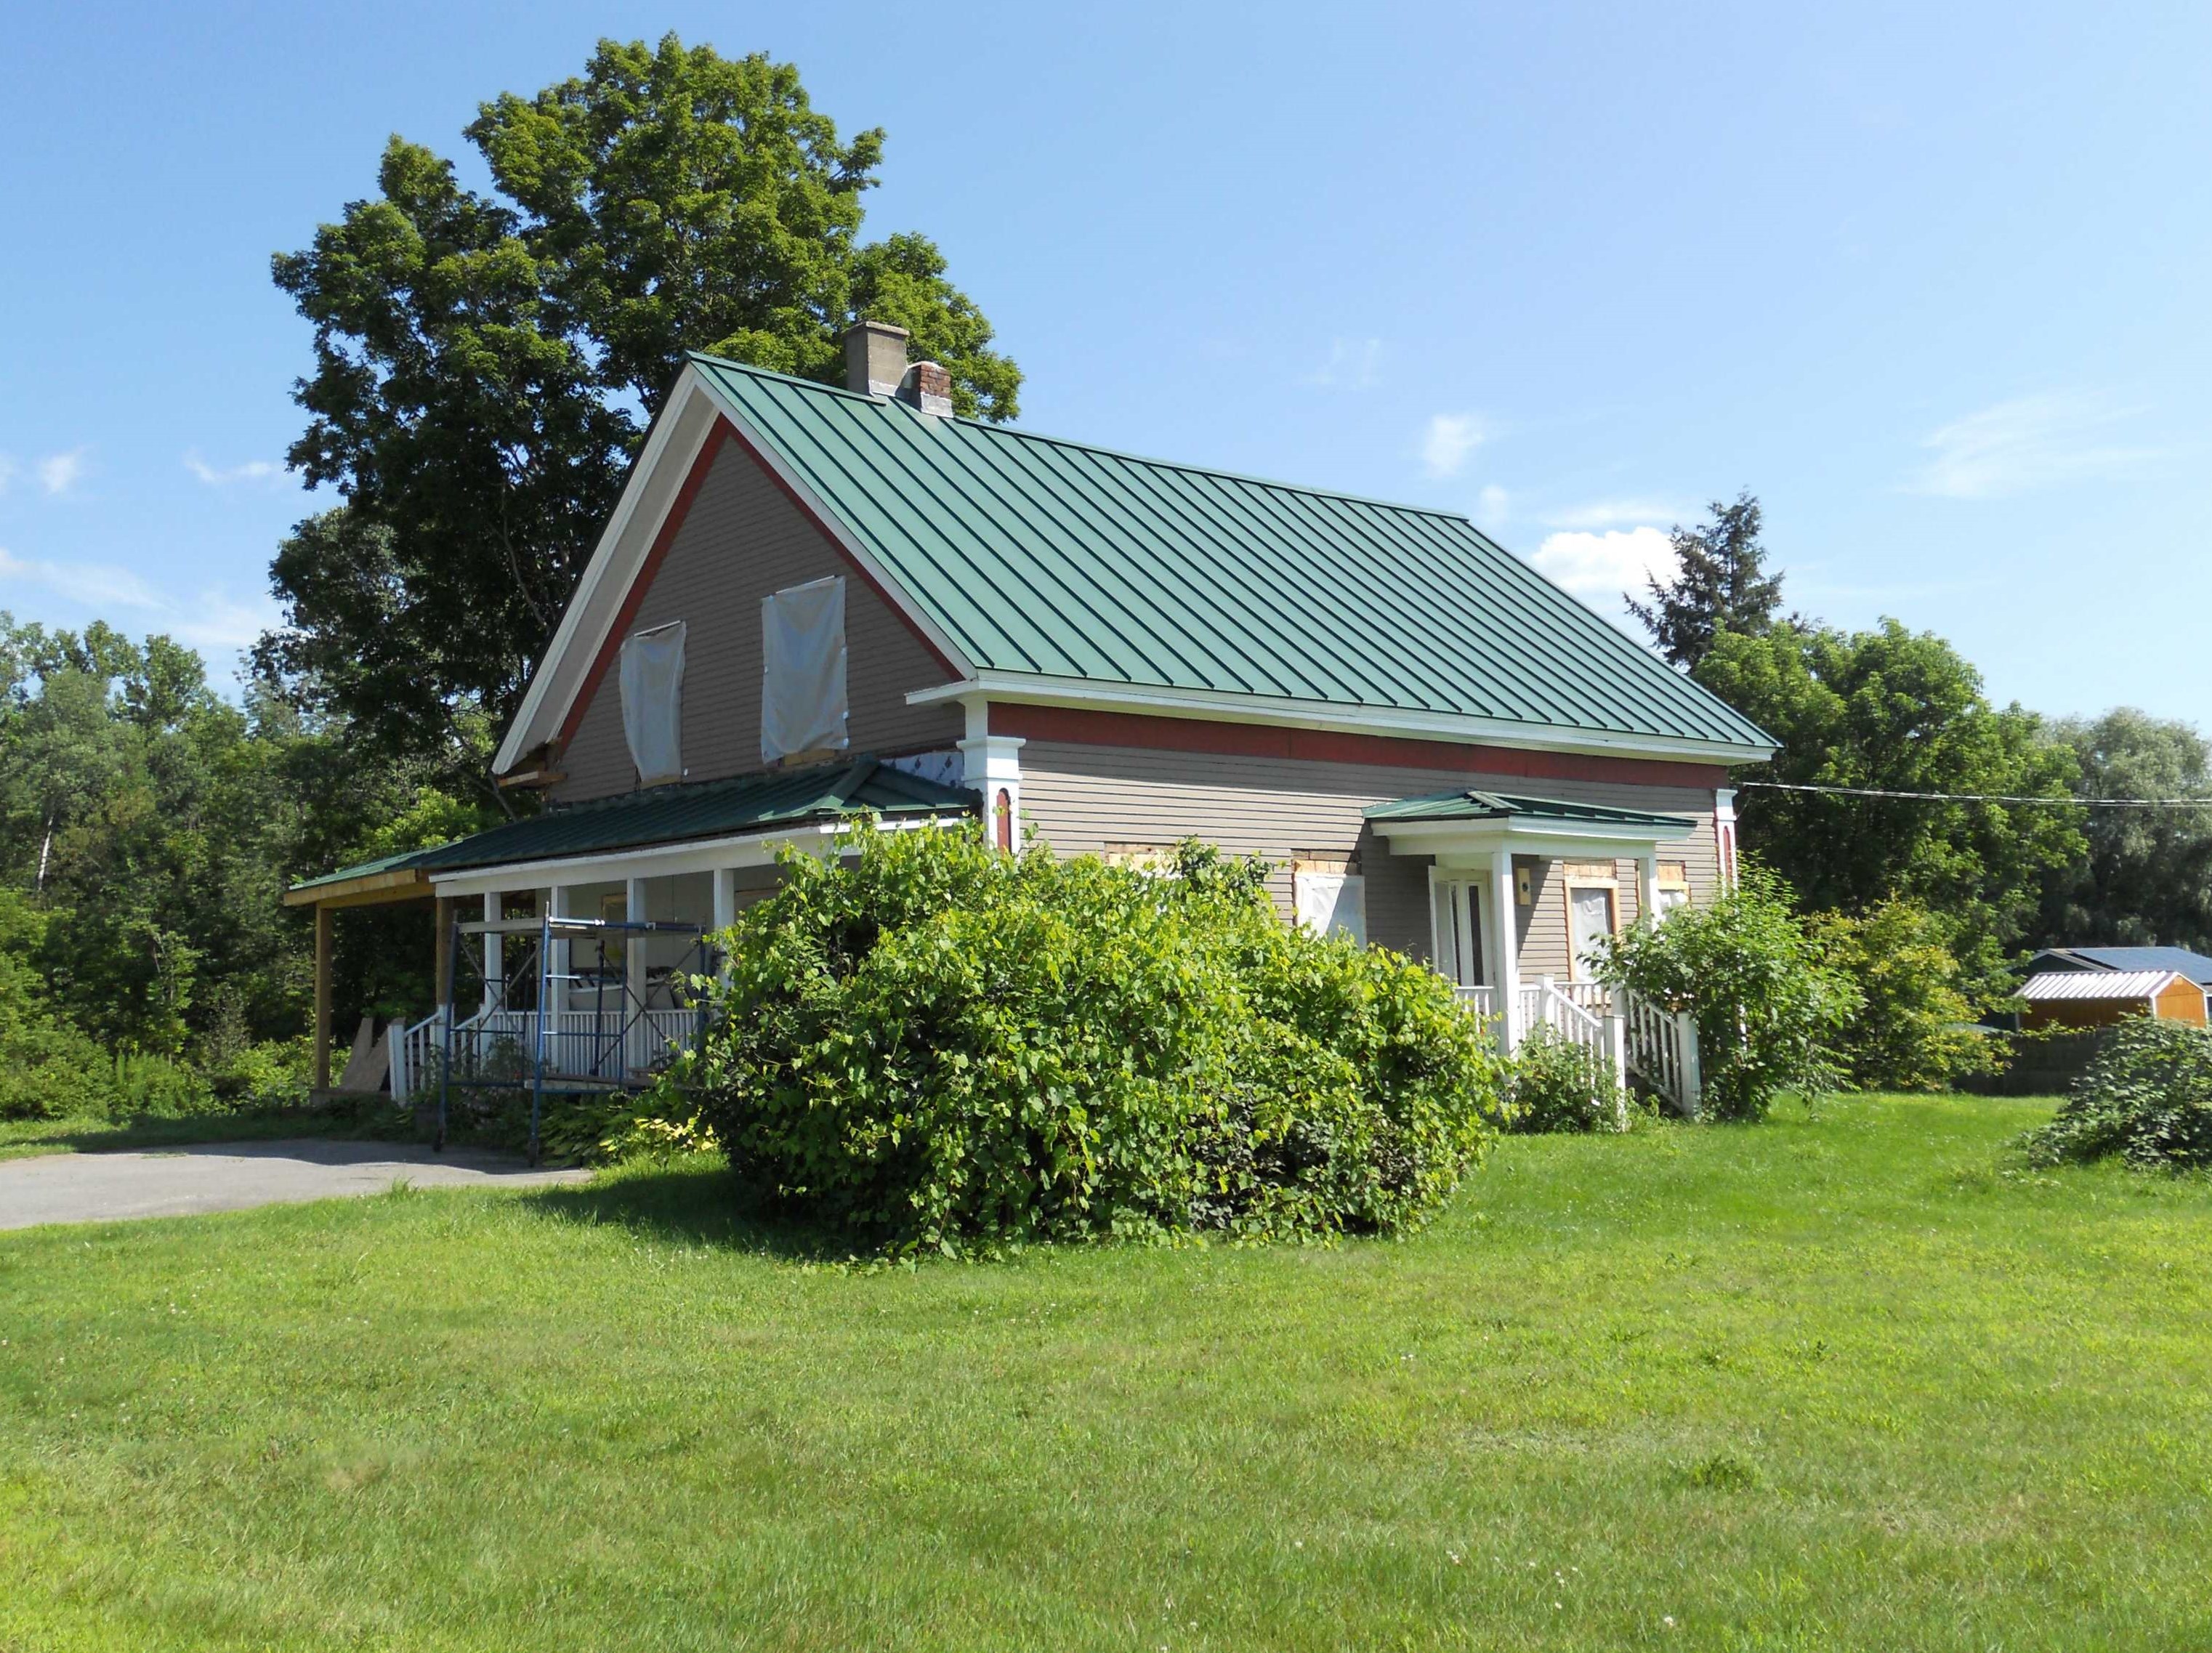 3910 Claremont Rd, Unity, NH 03603